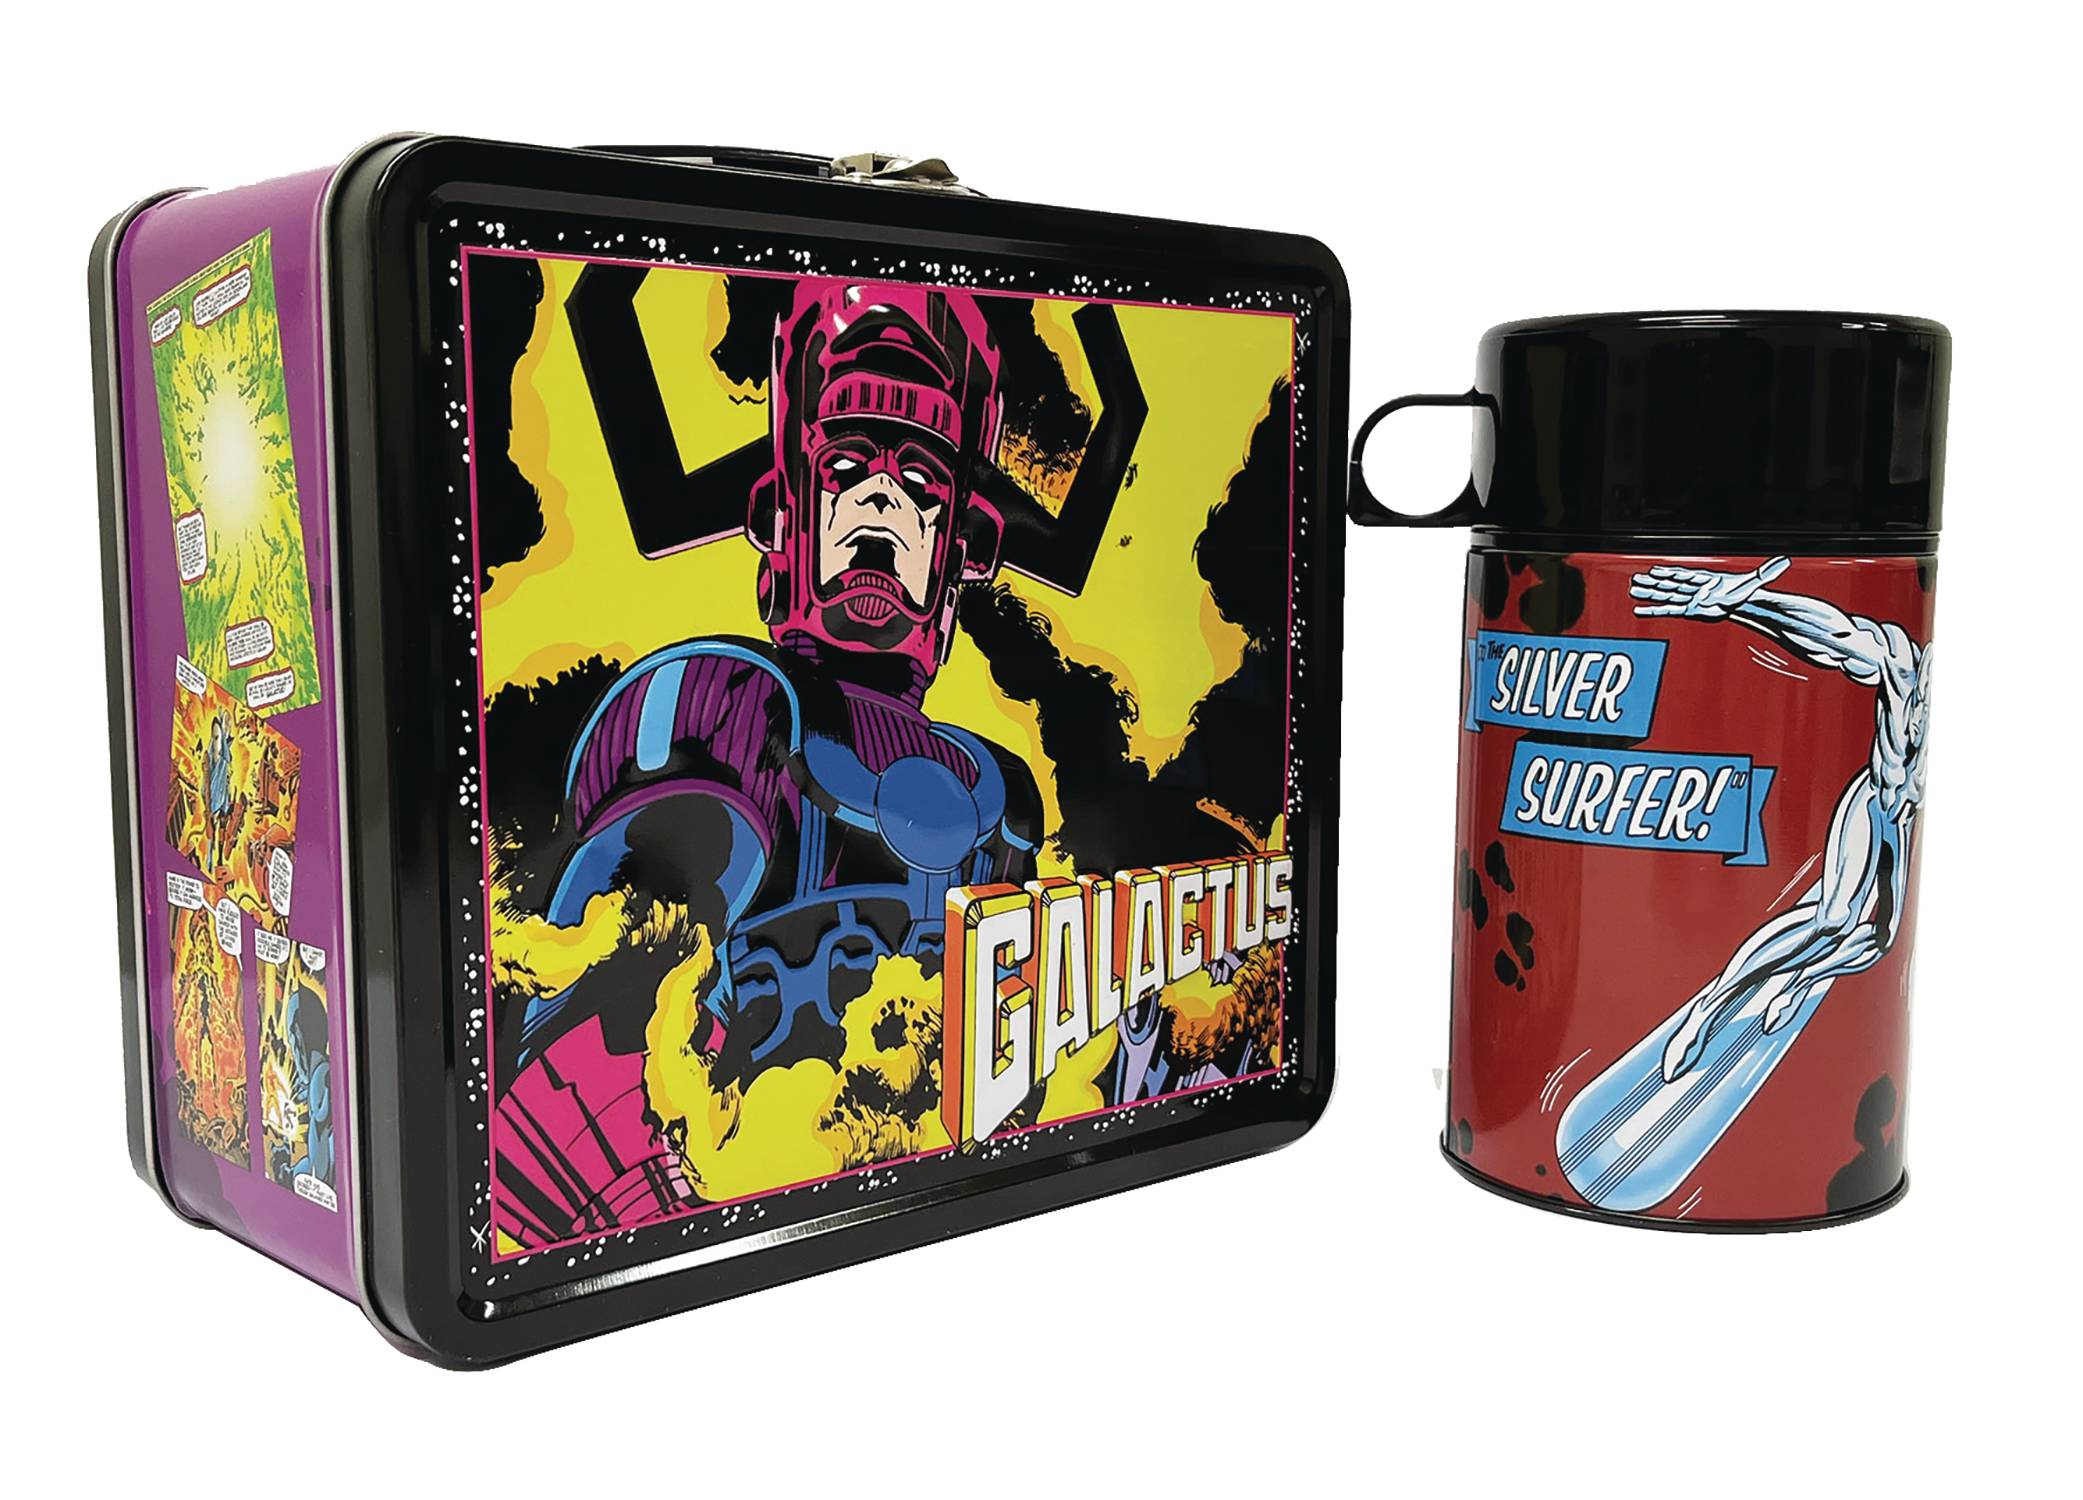 TIN TITANS MARVEL GALACTUS PX LUNCHBOX & BEV CONTAINER (O/A)